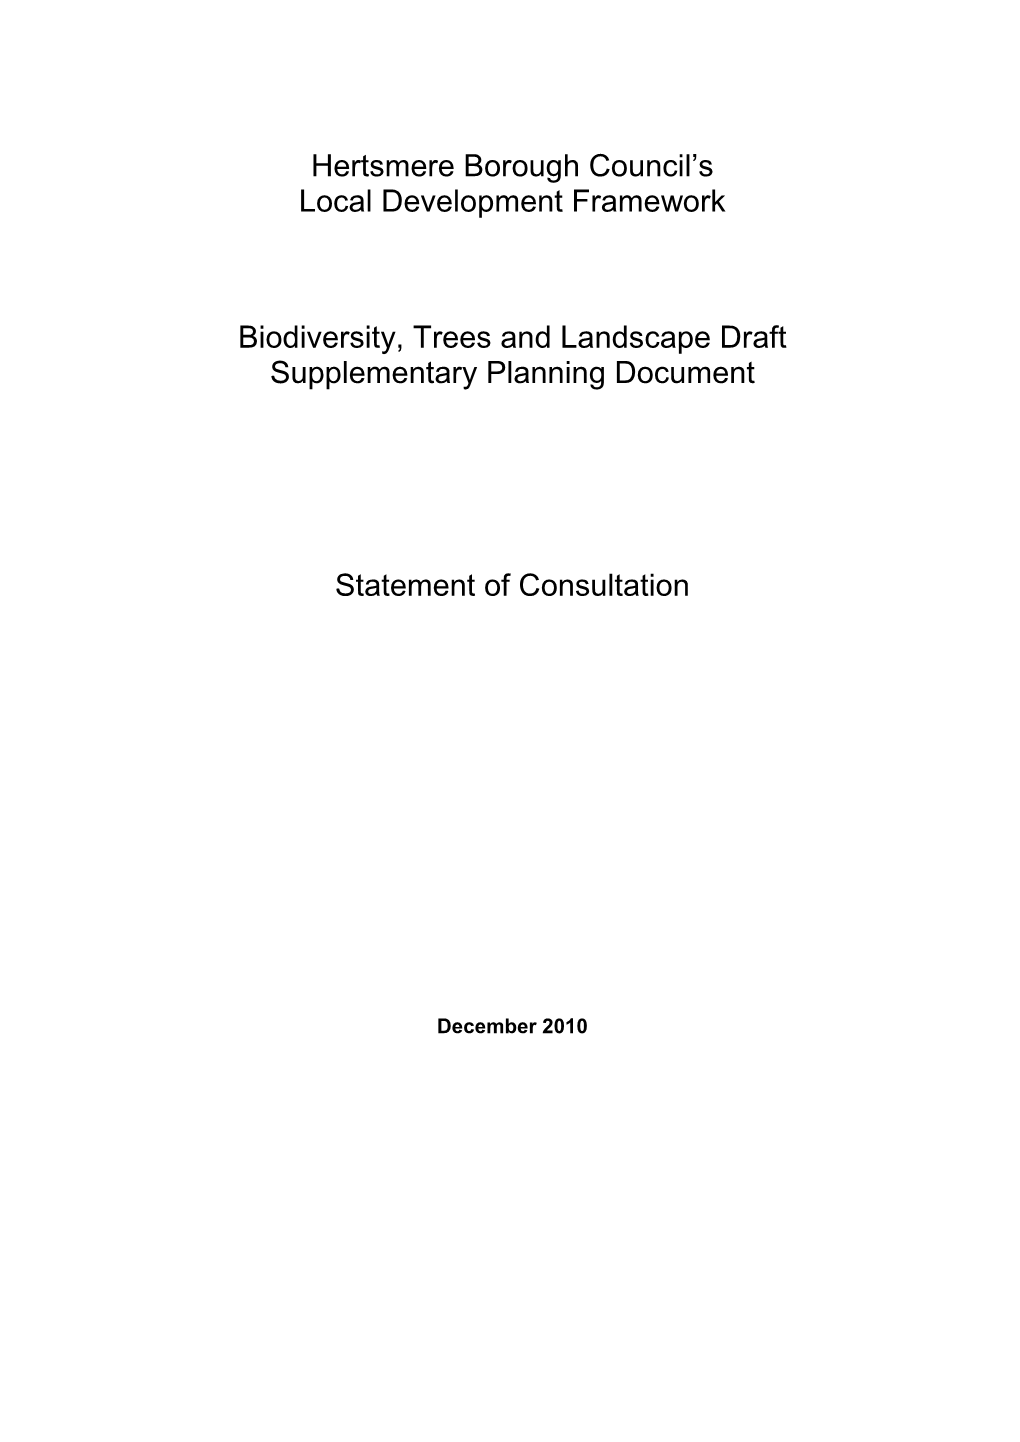 Biodiversity Trees and Landscape Statement of Consultation